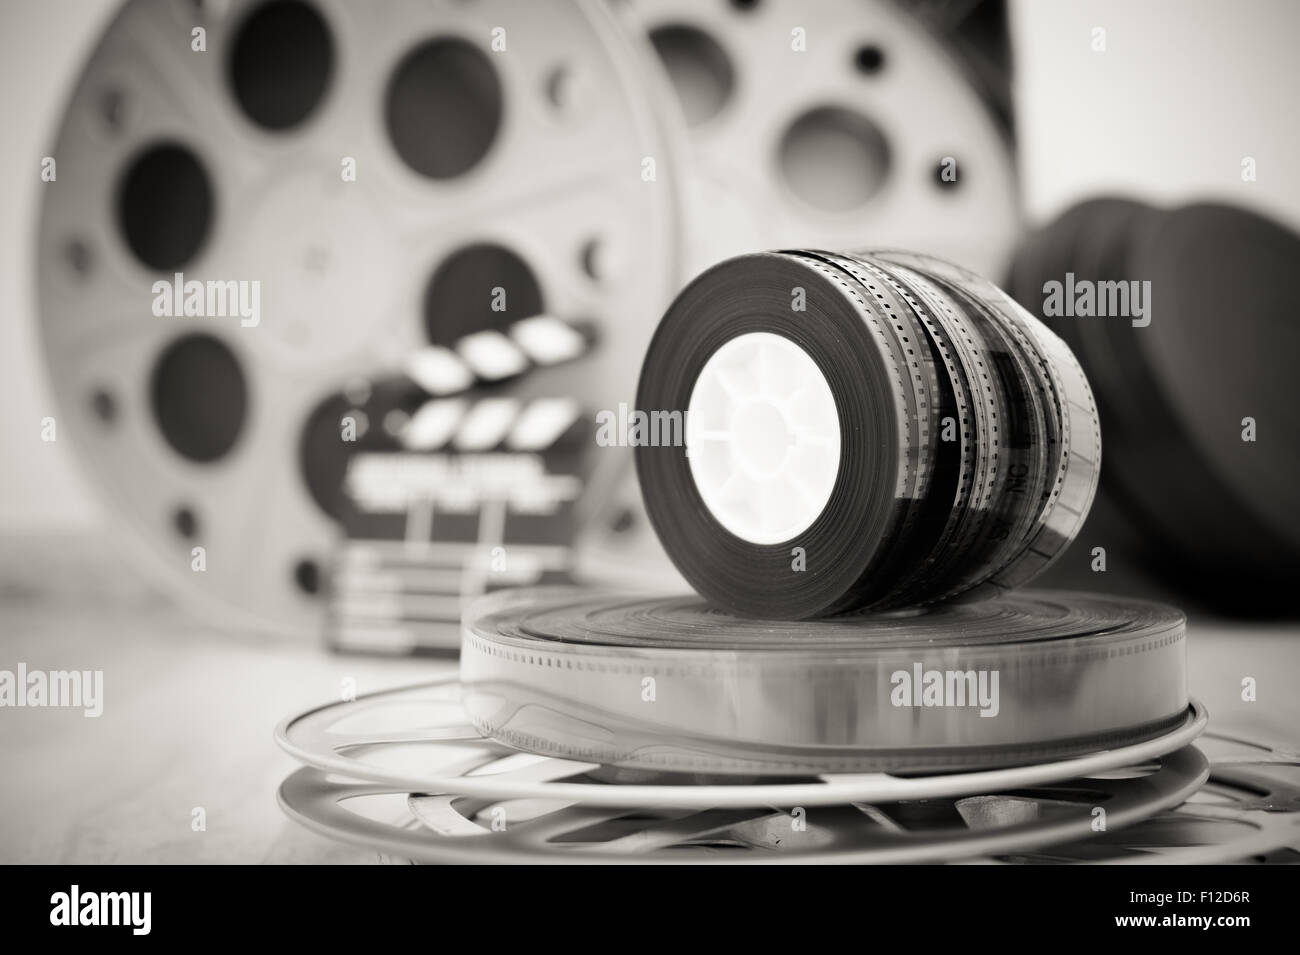 https://c8.alamy.com/comp/F12D6R/heap-of-old-35-mm-movie-reels-with-out-of-focus-clapper-and-boxes-F12D6R.jpg